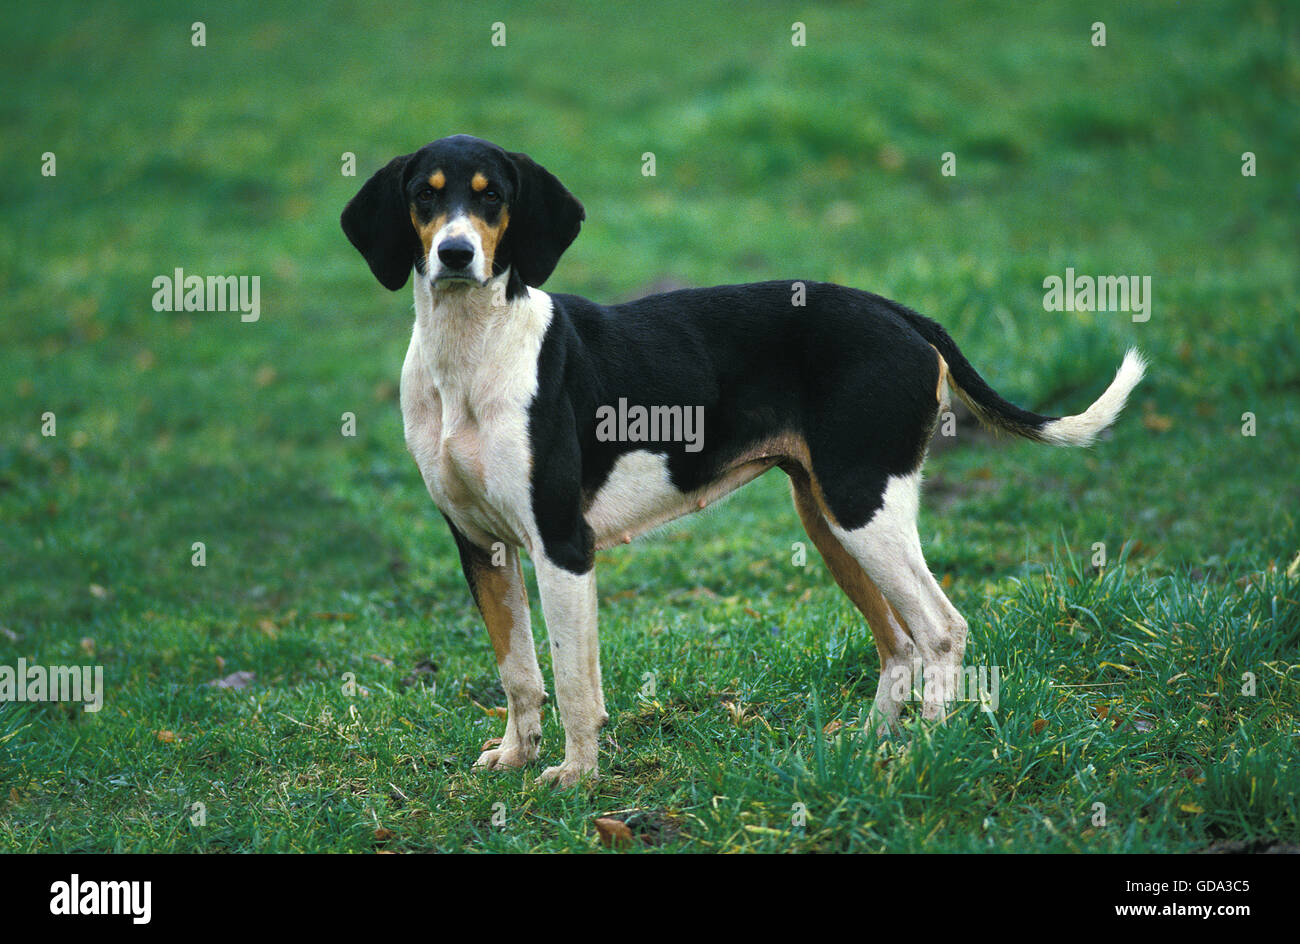 GREAT ANGLO-FRENCH TRICOLOUR HOUND, ADULT ON GRASS Stock Photo